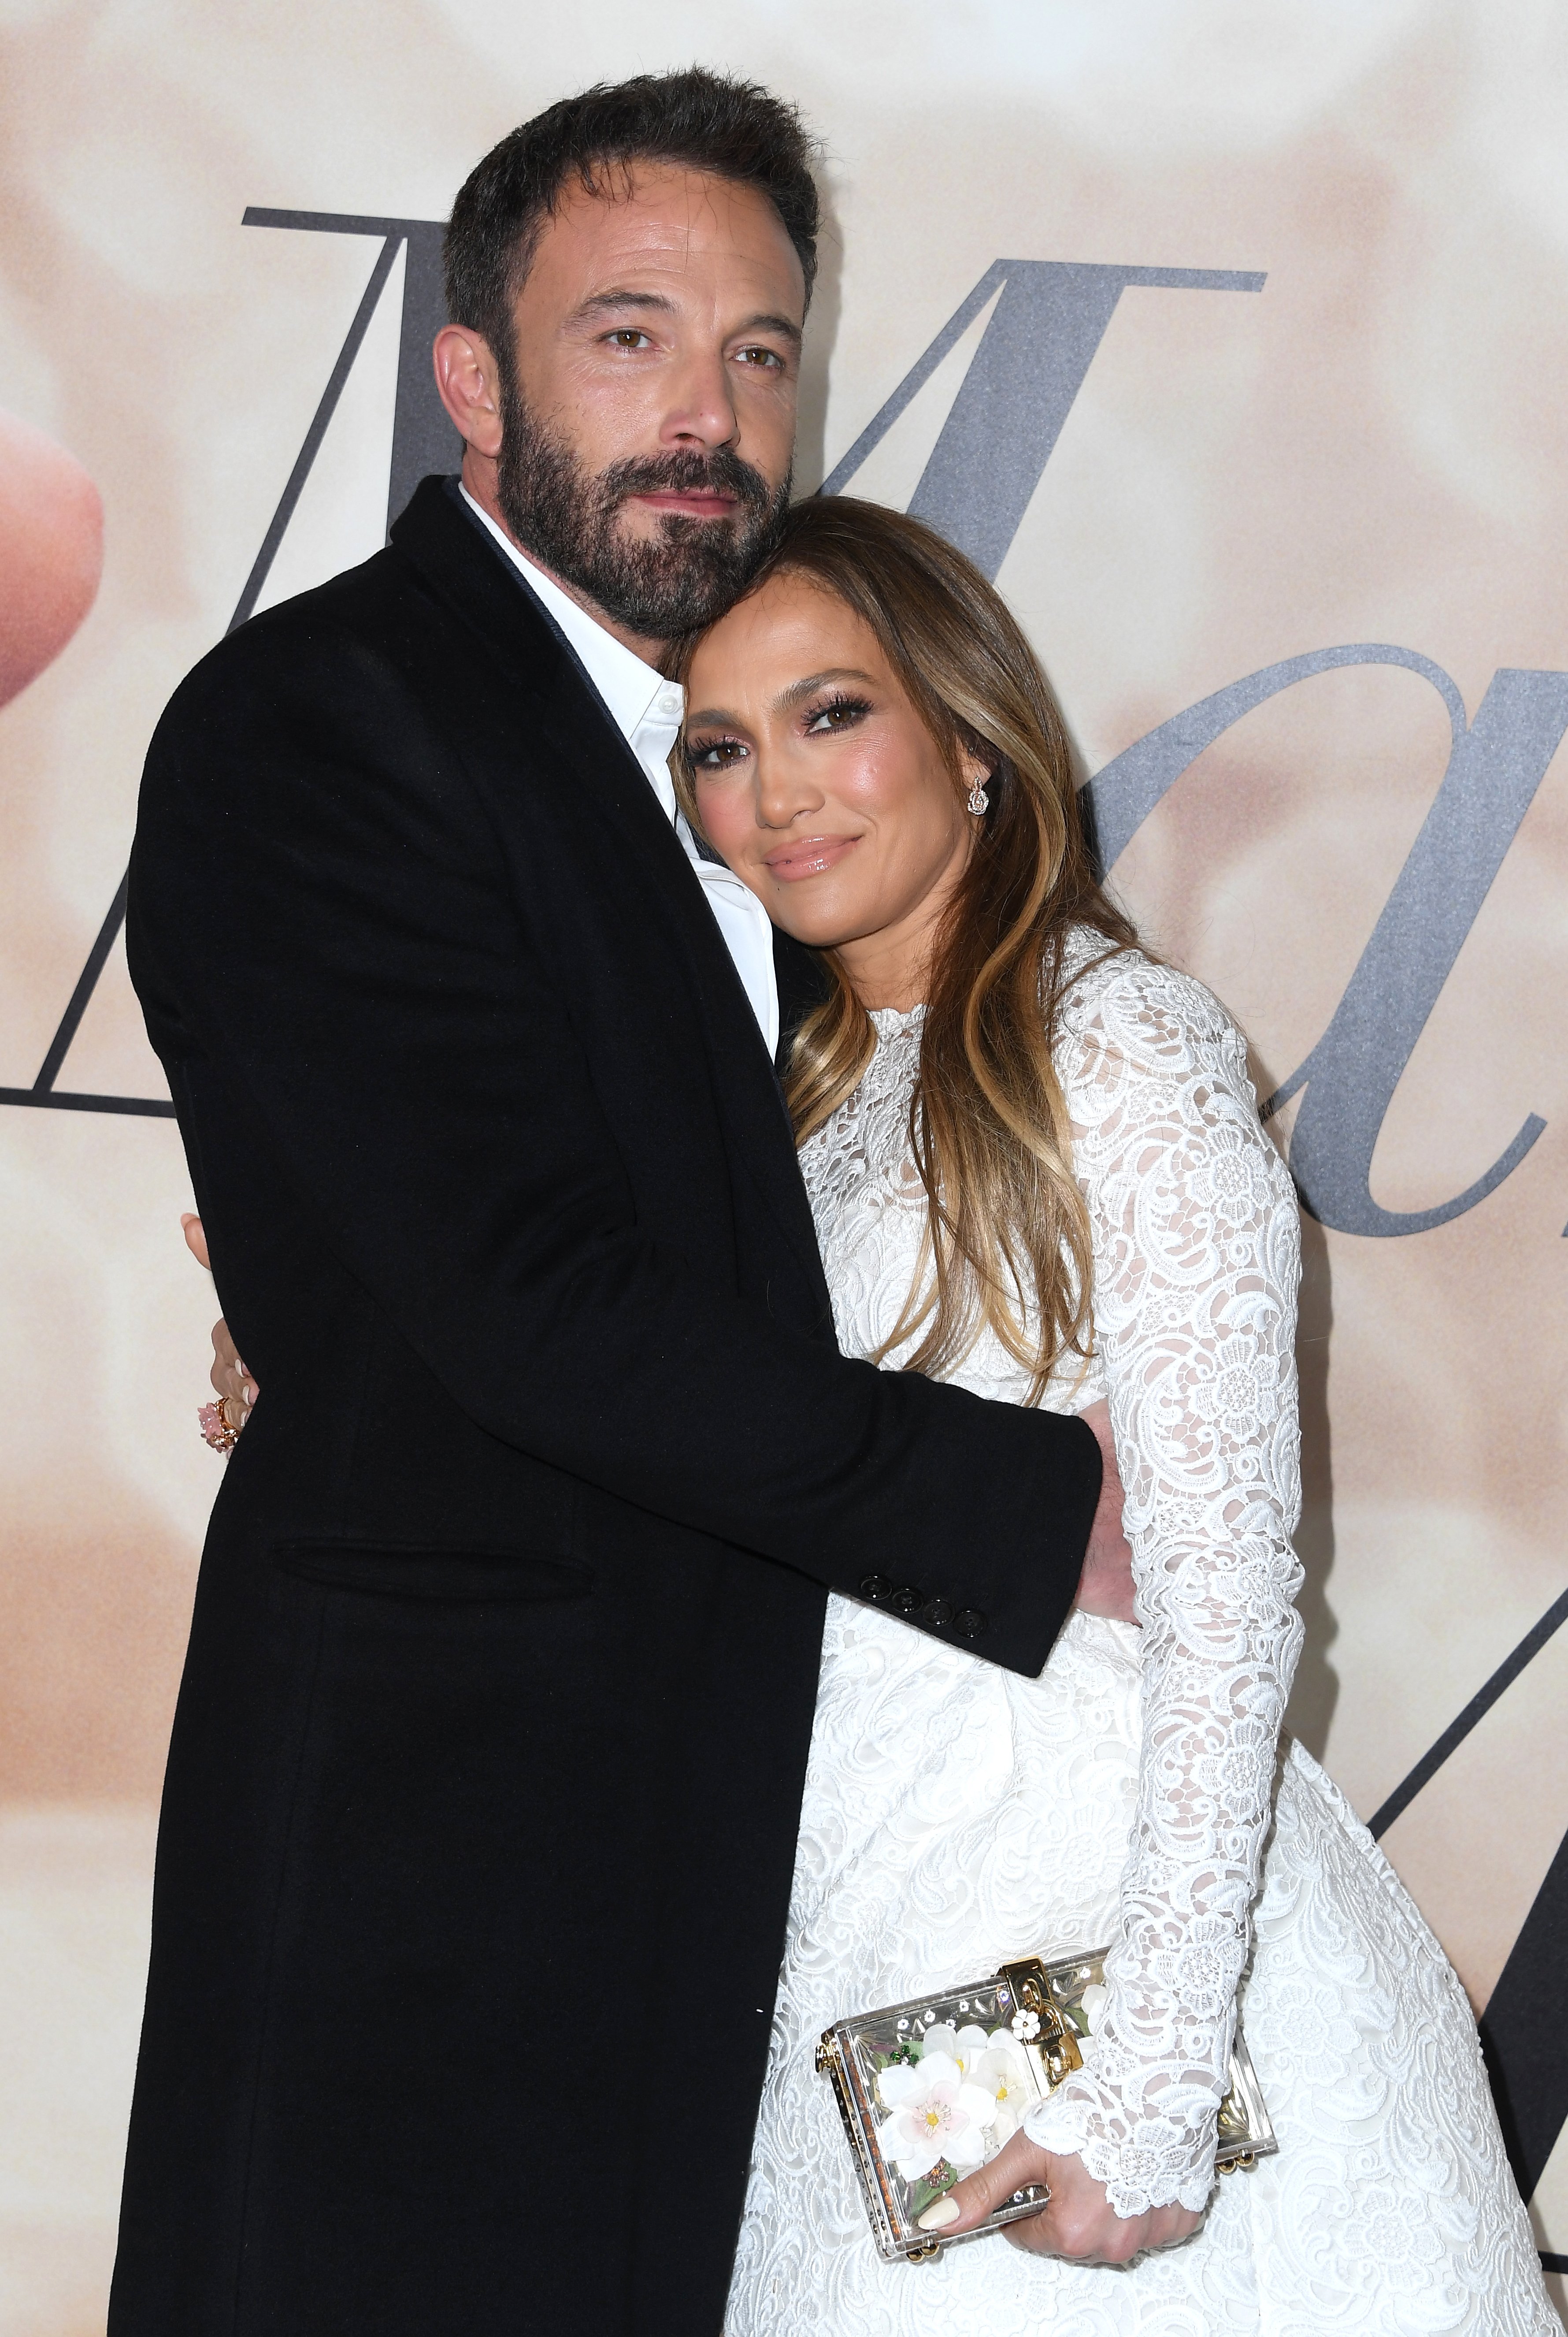 Ben Affleck and Jennifer Lopez arriving at the Los Angeles special screening of "Marry Me" on February 08, 2022 in Los Angeles, California. /  Source: Getty Images